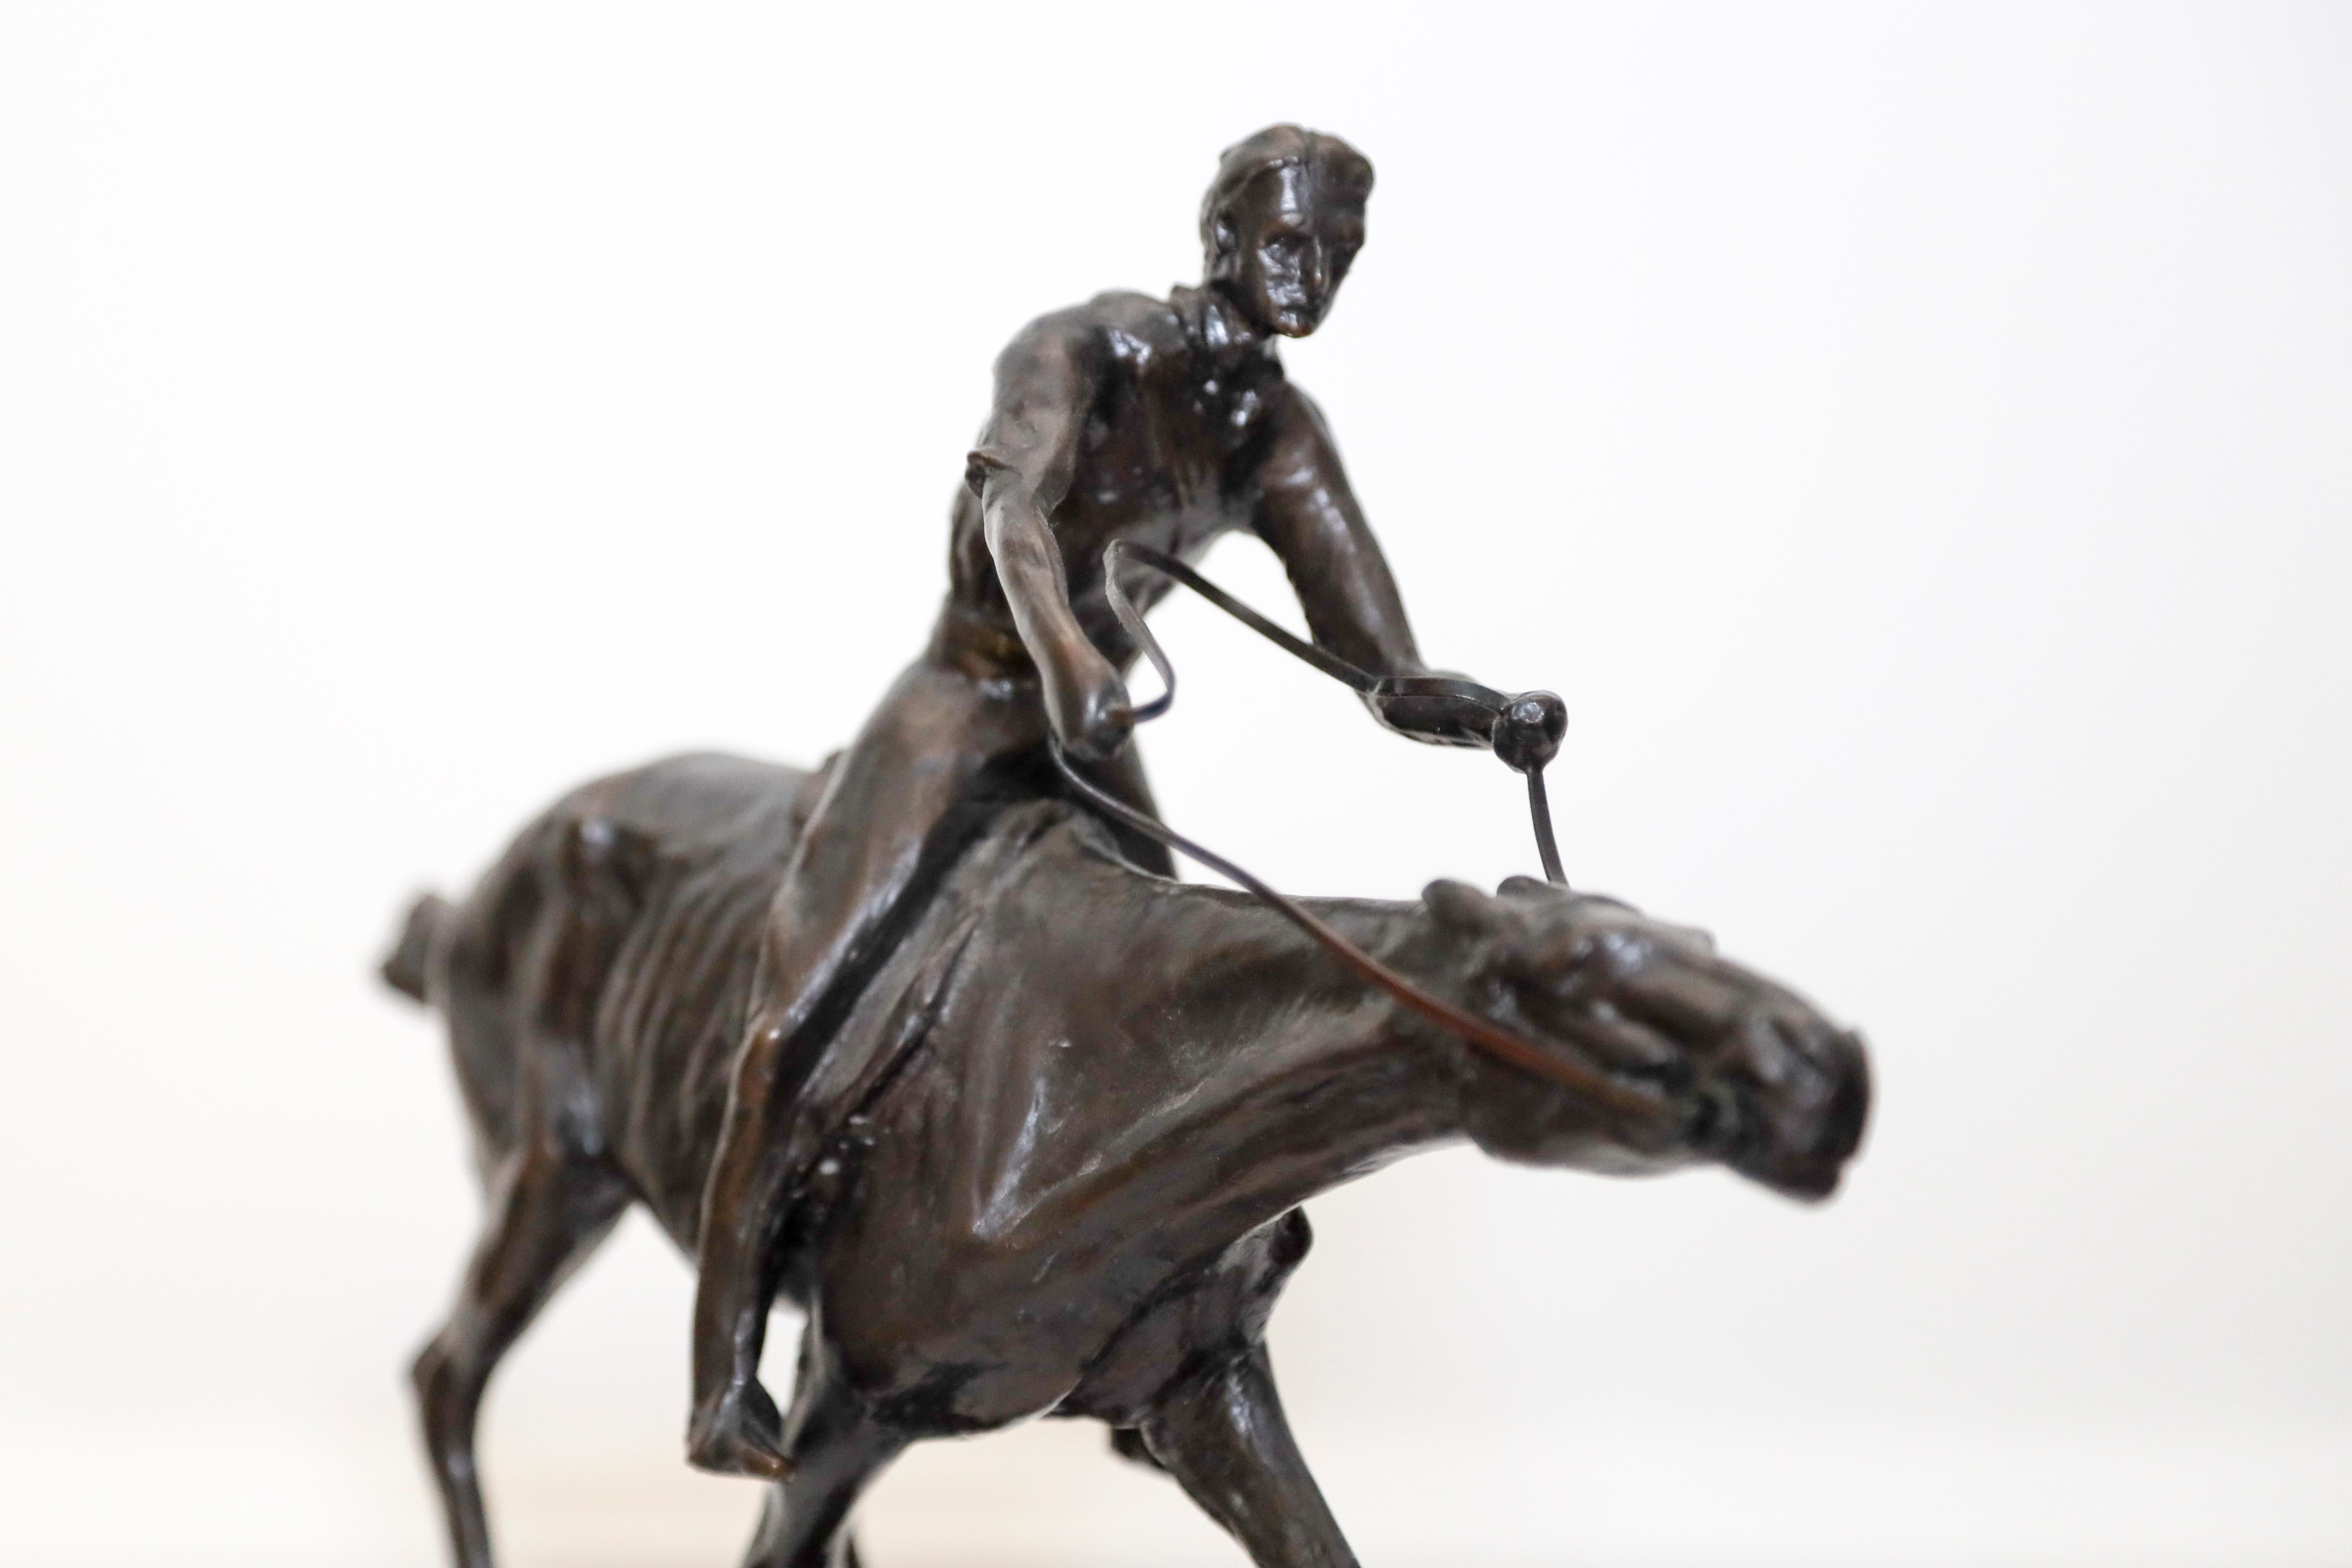 Rumsey’s specialties included equestrian sculptures – portraits of polo players and prize horses, as well as of cowboys, cattle and horses as metaphors. He worked principally in bronze and stone, often employing mythology and historical themes